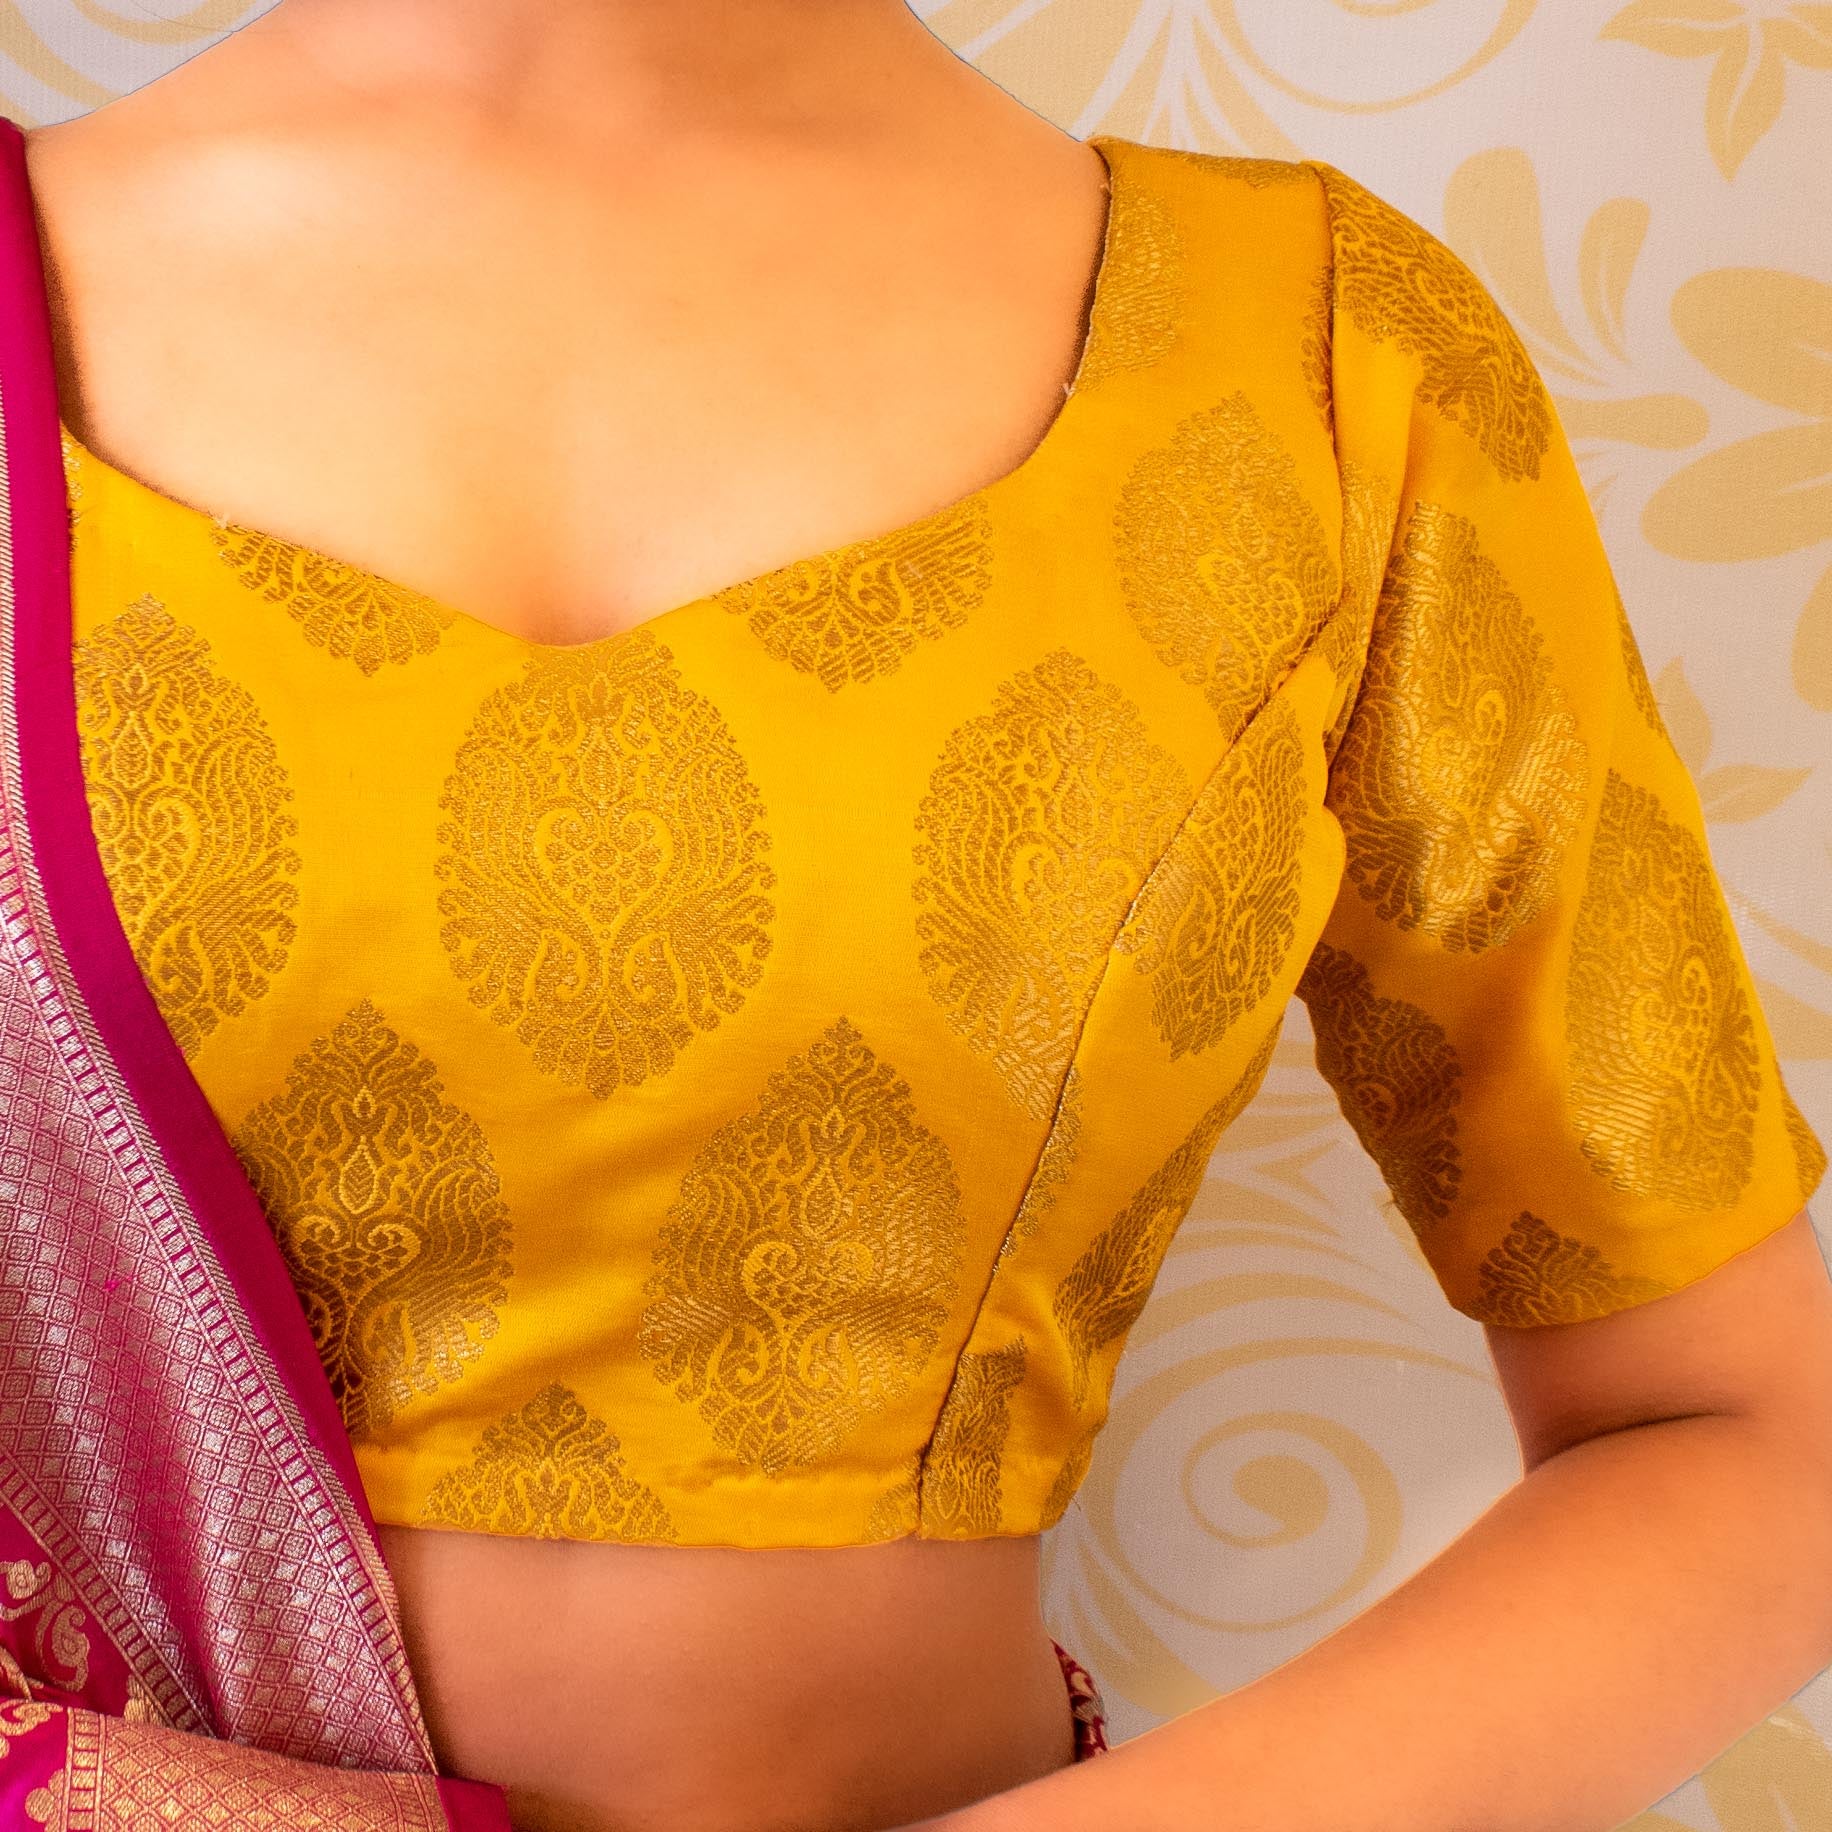 Butter yellow V neck brocade blouse with back detailing – House of